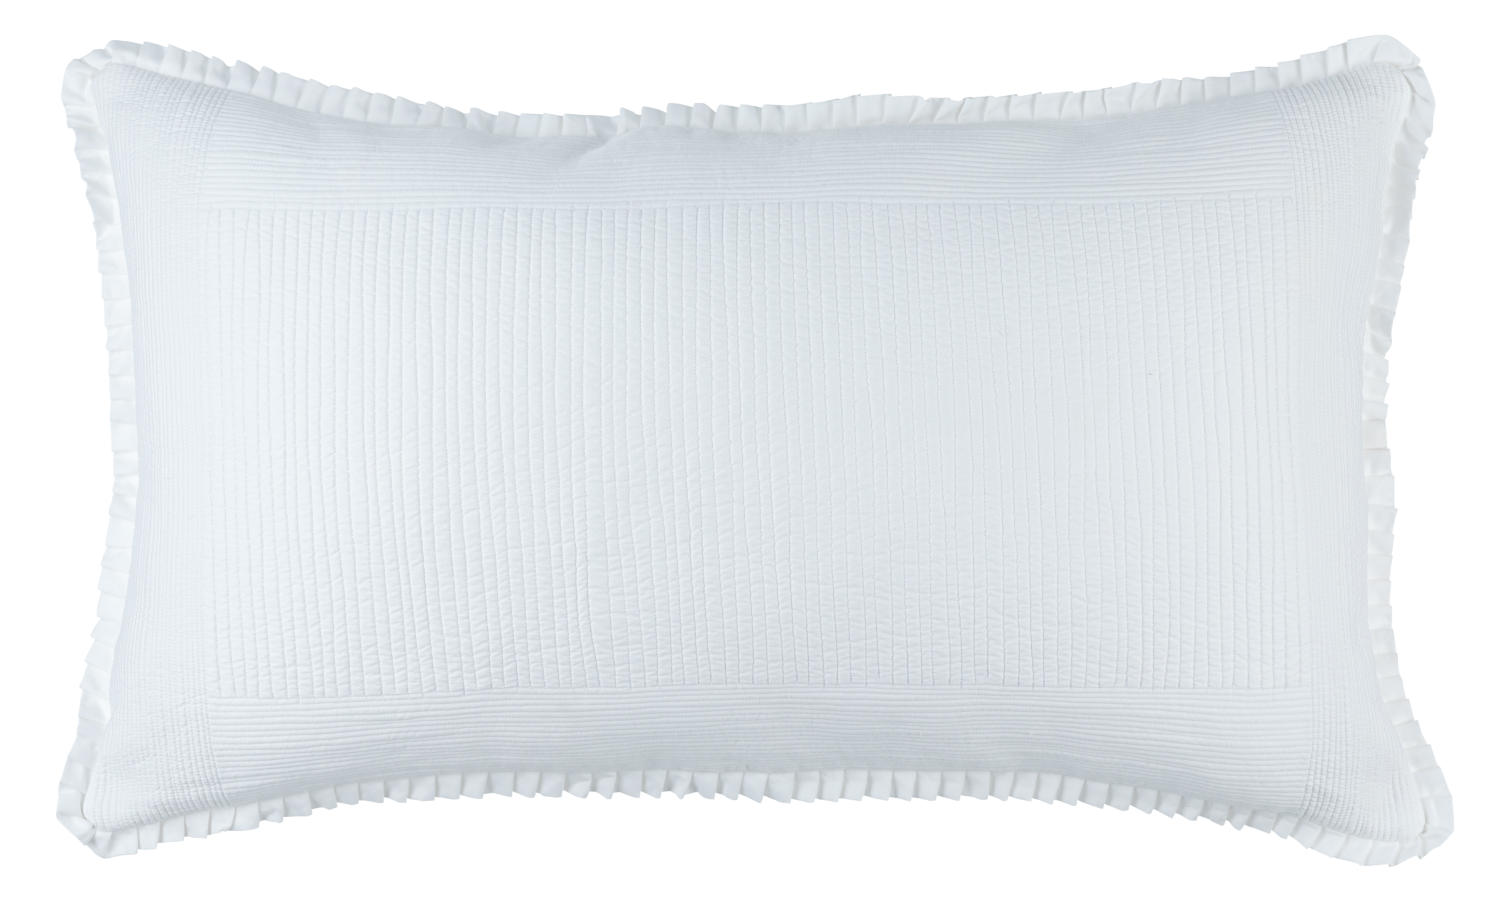 Lili Alessandra Battersea White Cotton Quilted Coverlets and Pillows